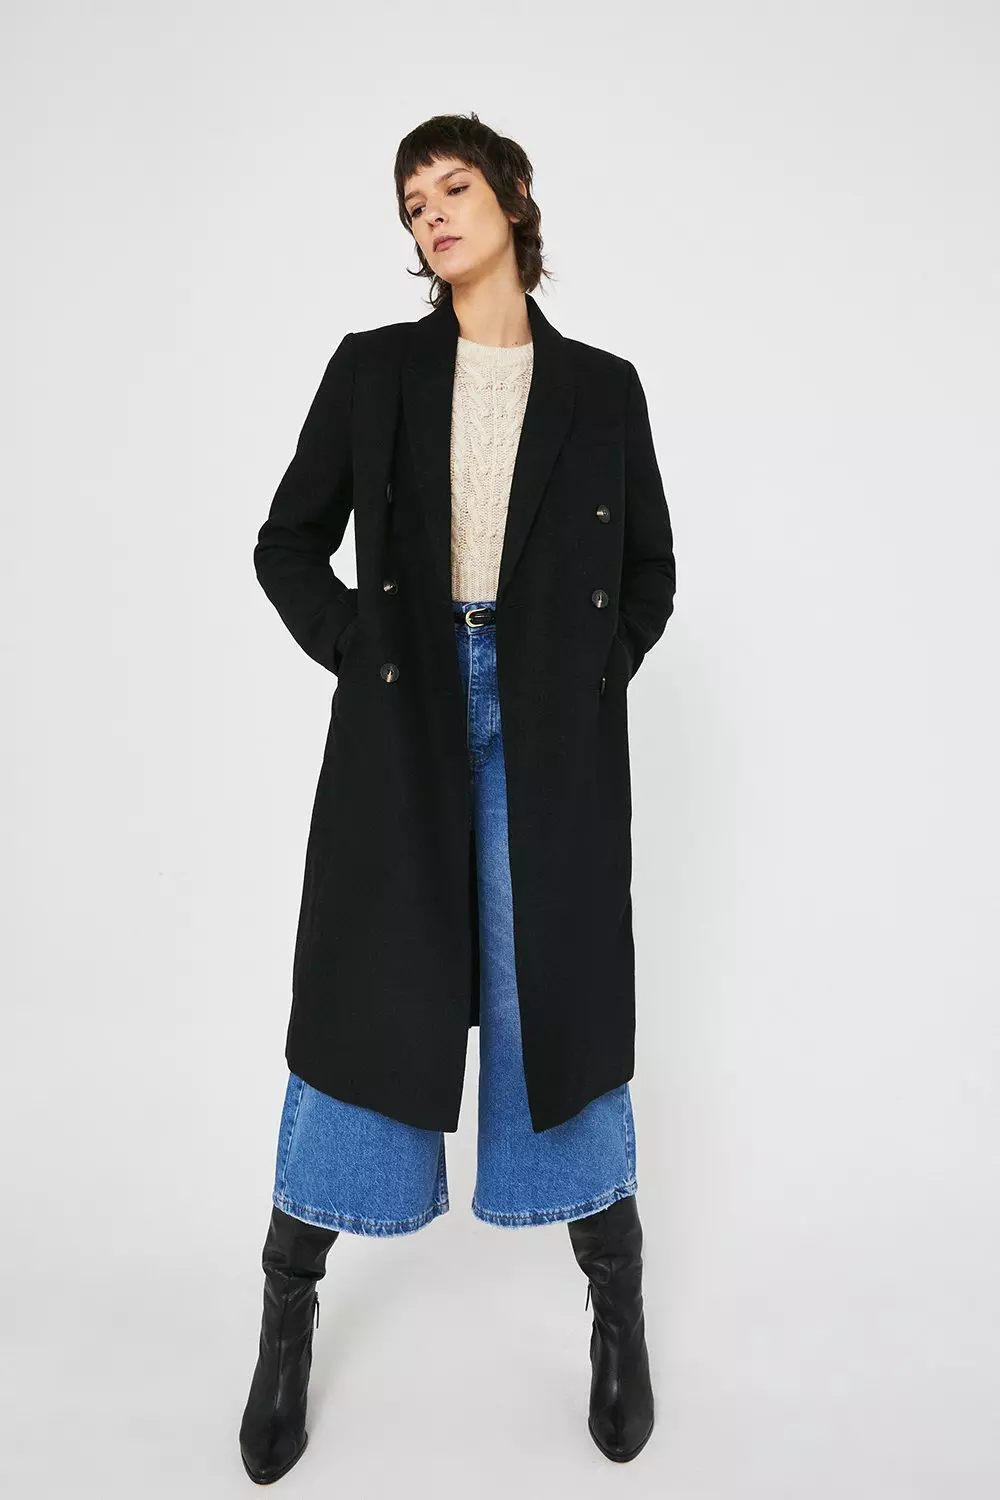 Double breasted tailored coat in wool blend